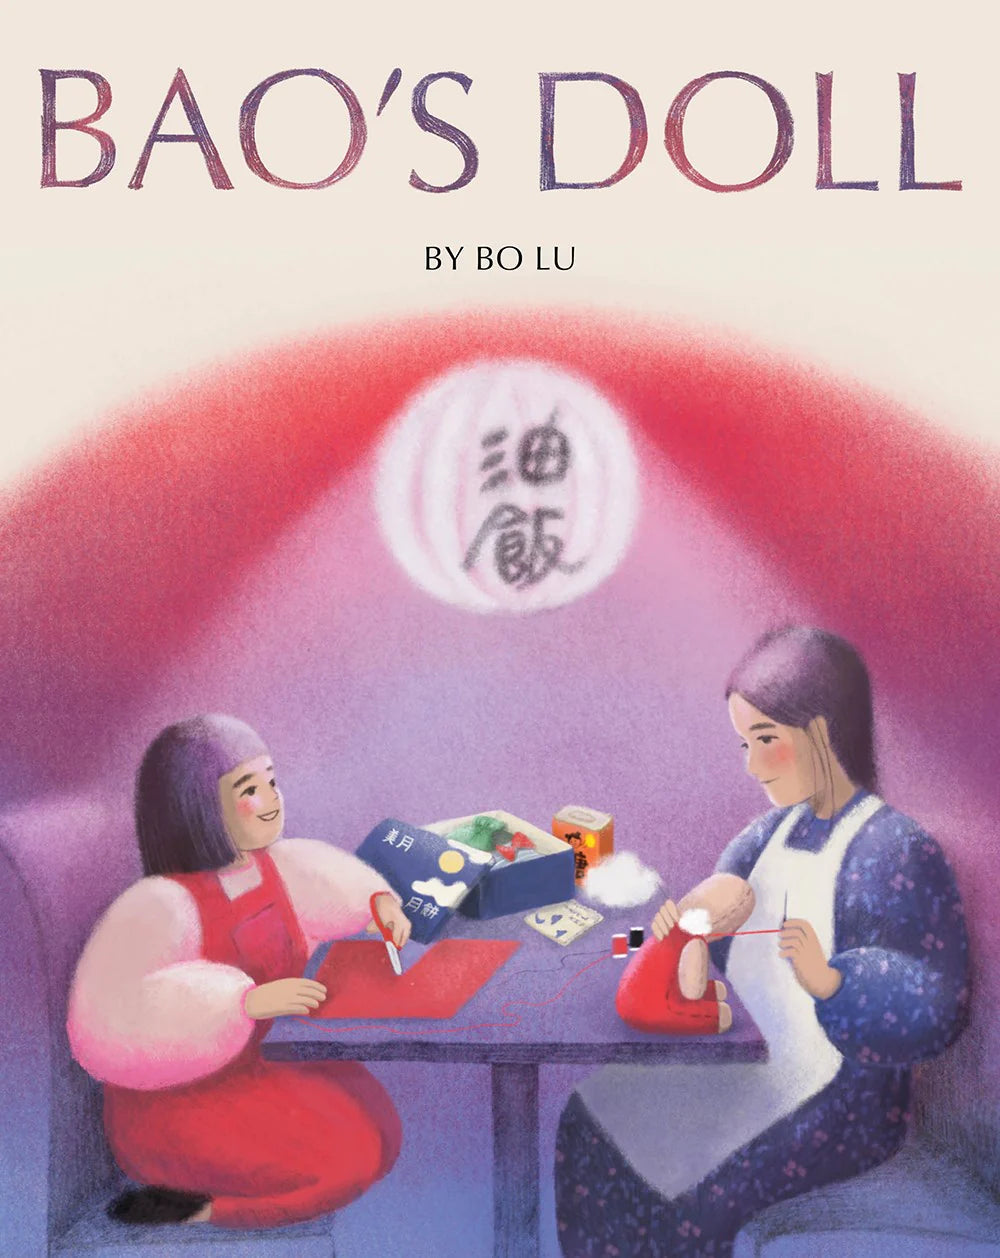 Bao's Doll: A Picture Book